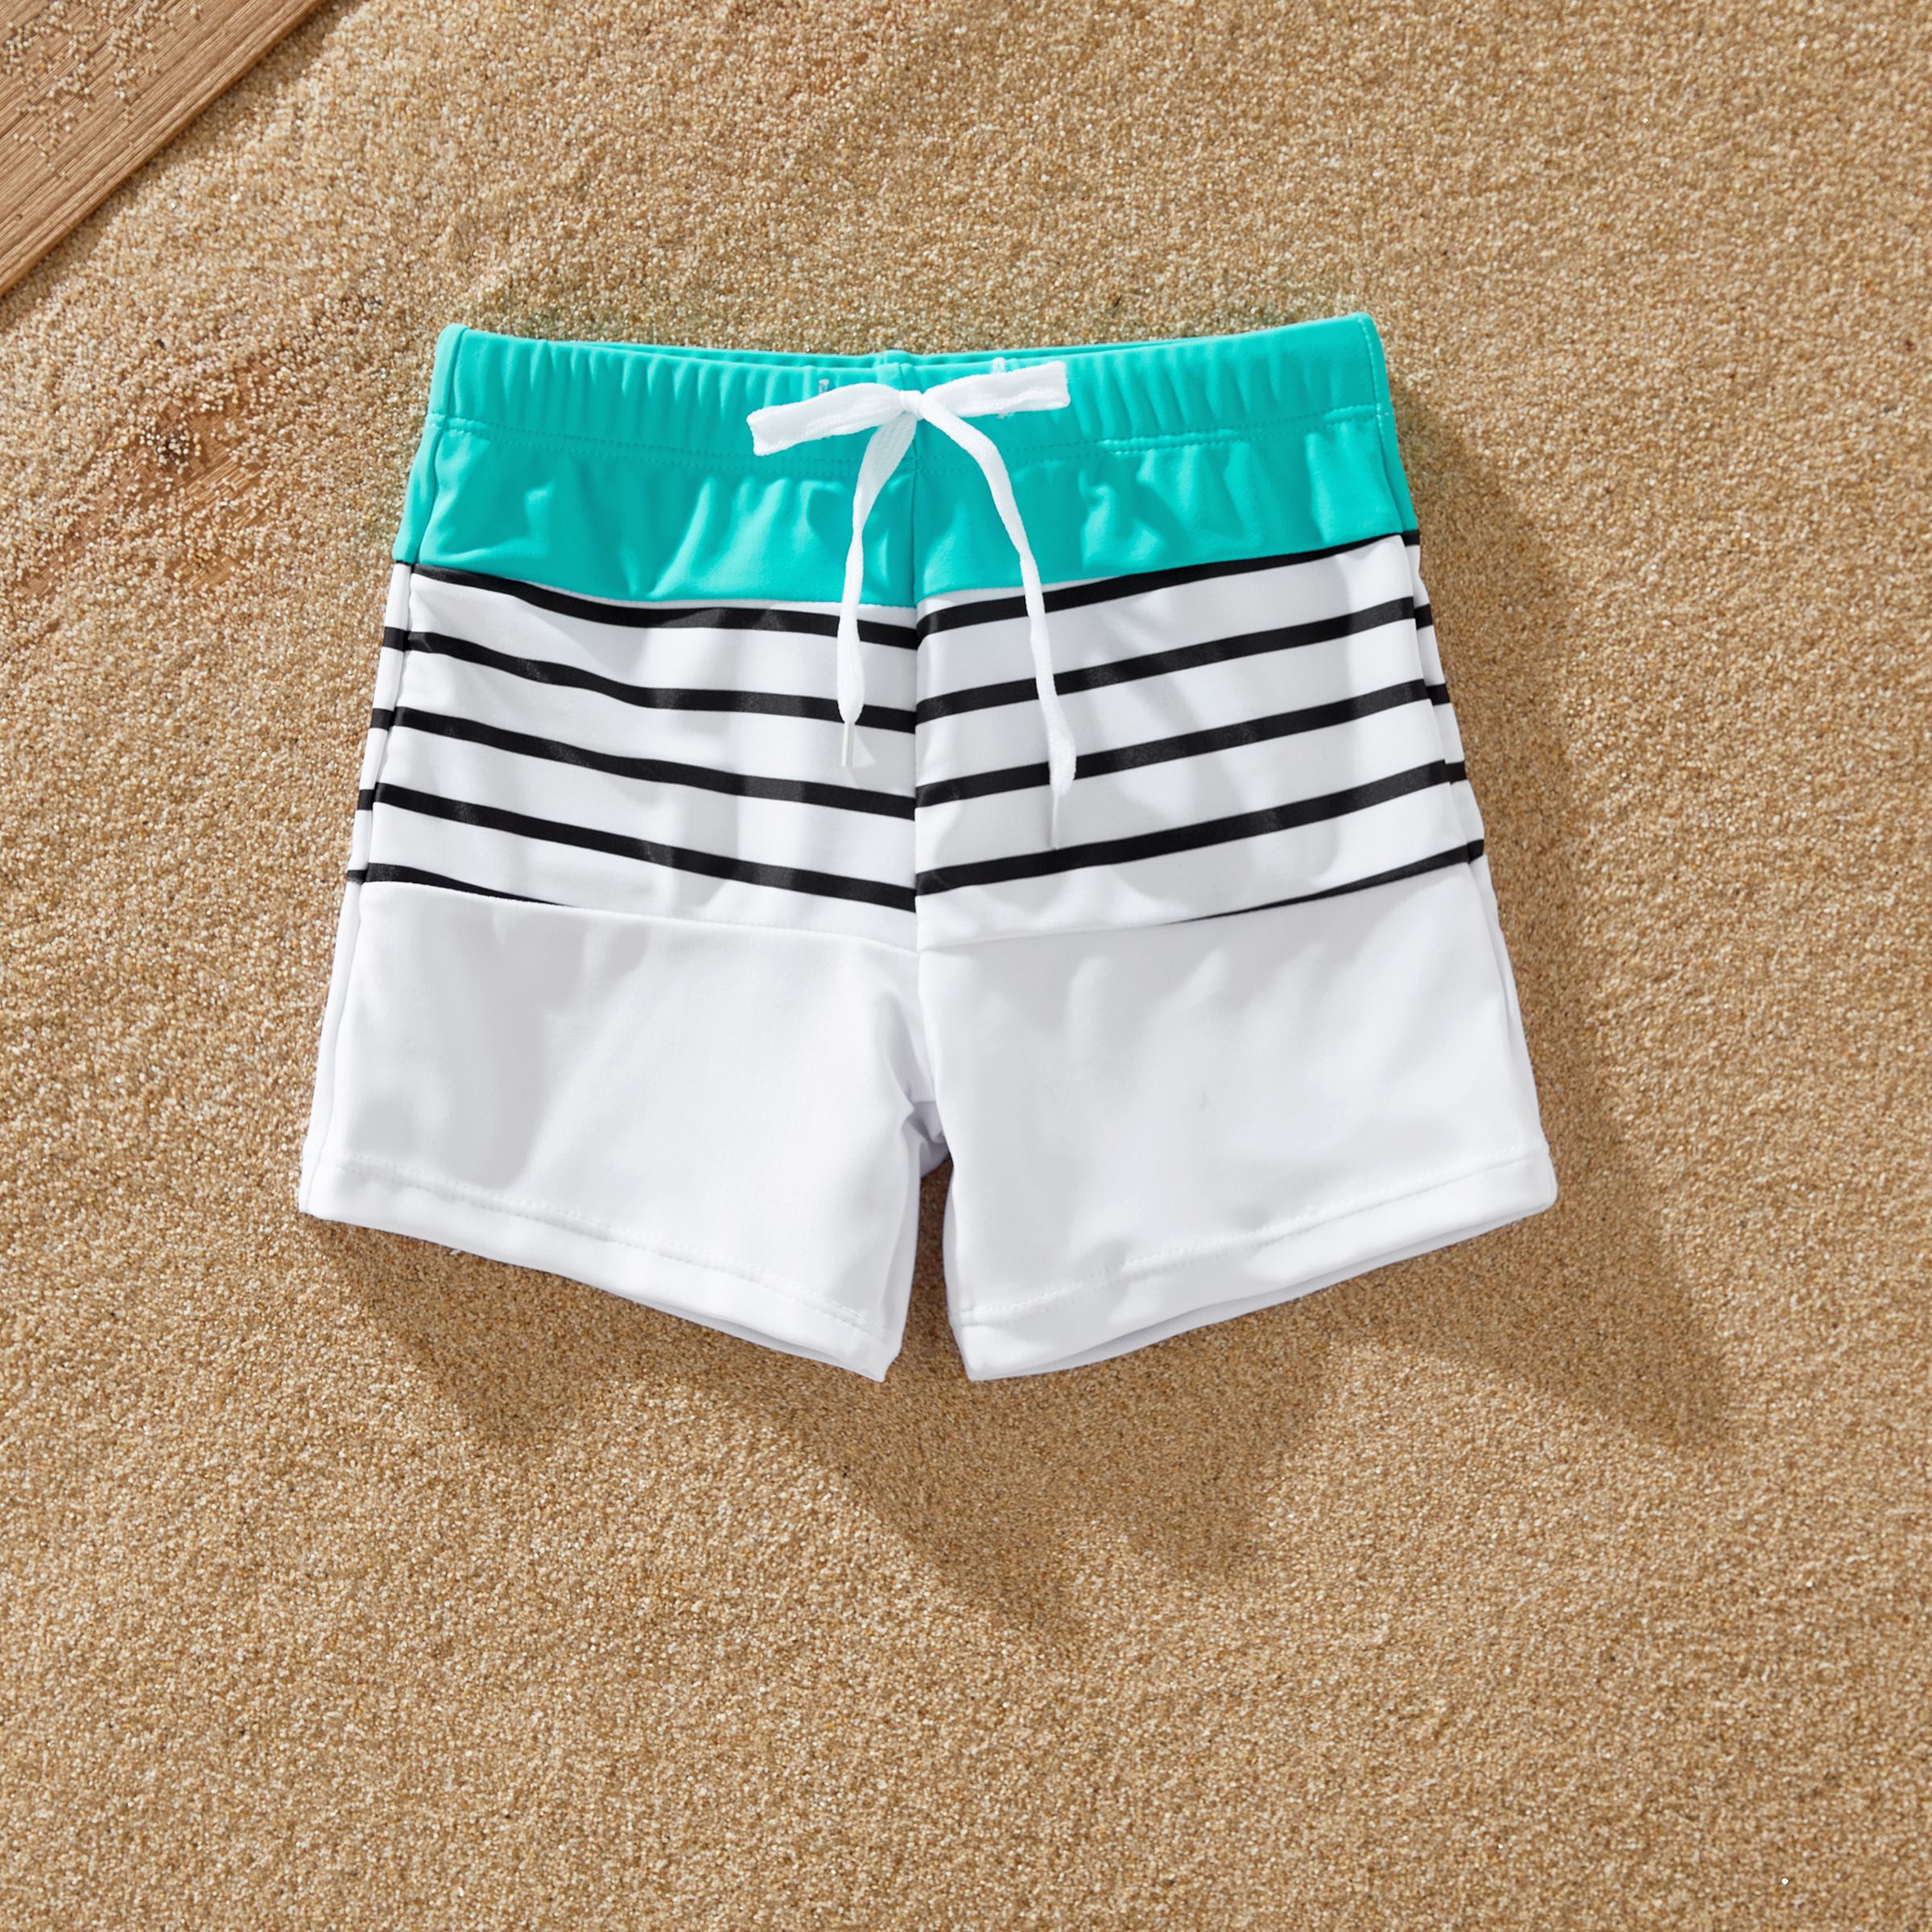 Family Matching Striped Spliced Cut Out One-piece Swimsuit and Colorblock Swim Trunks